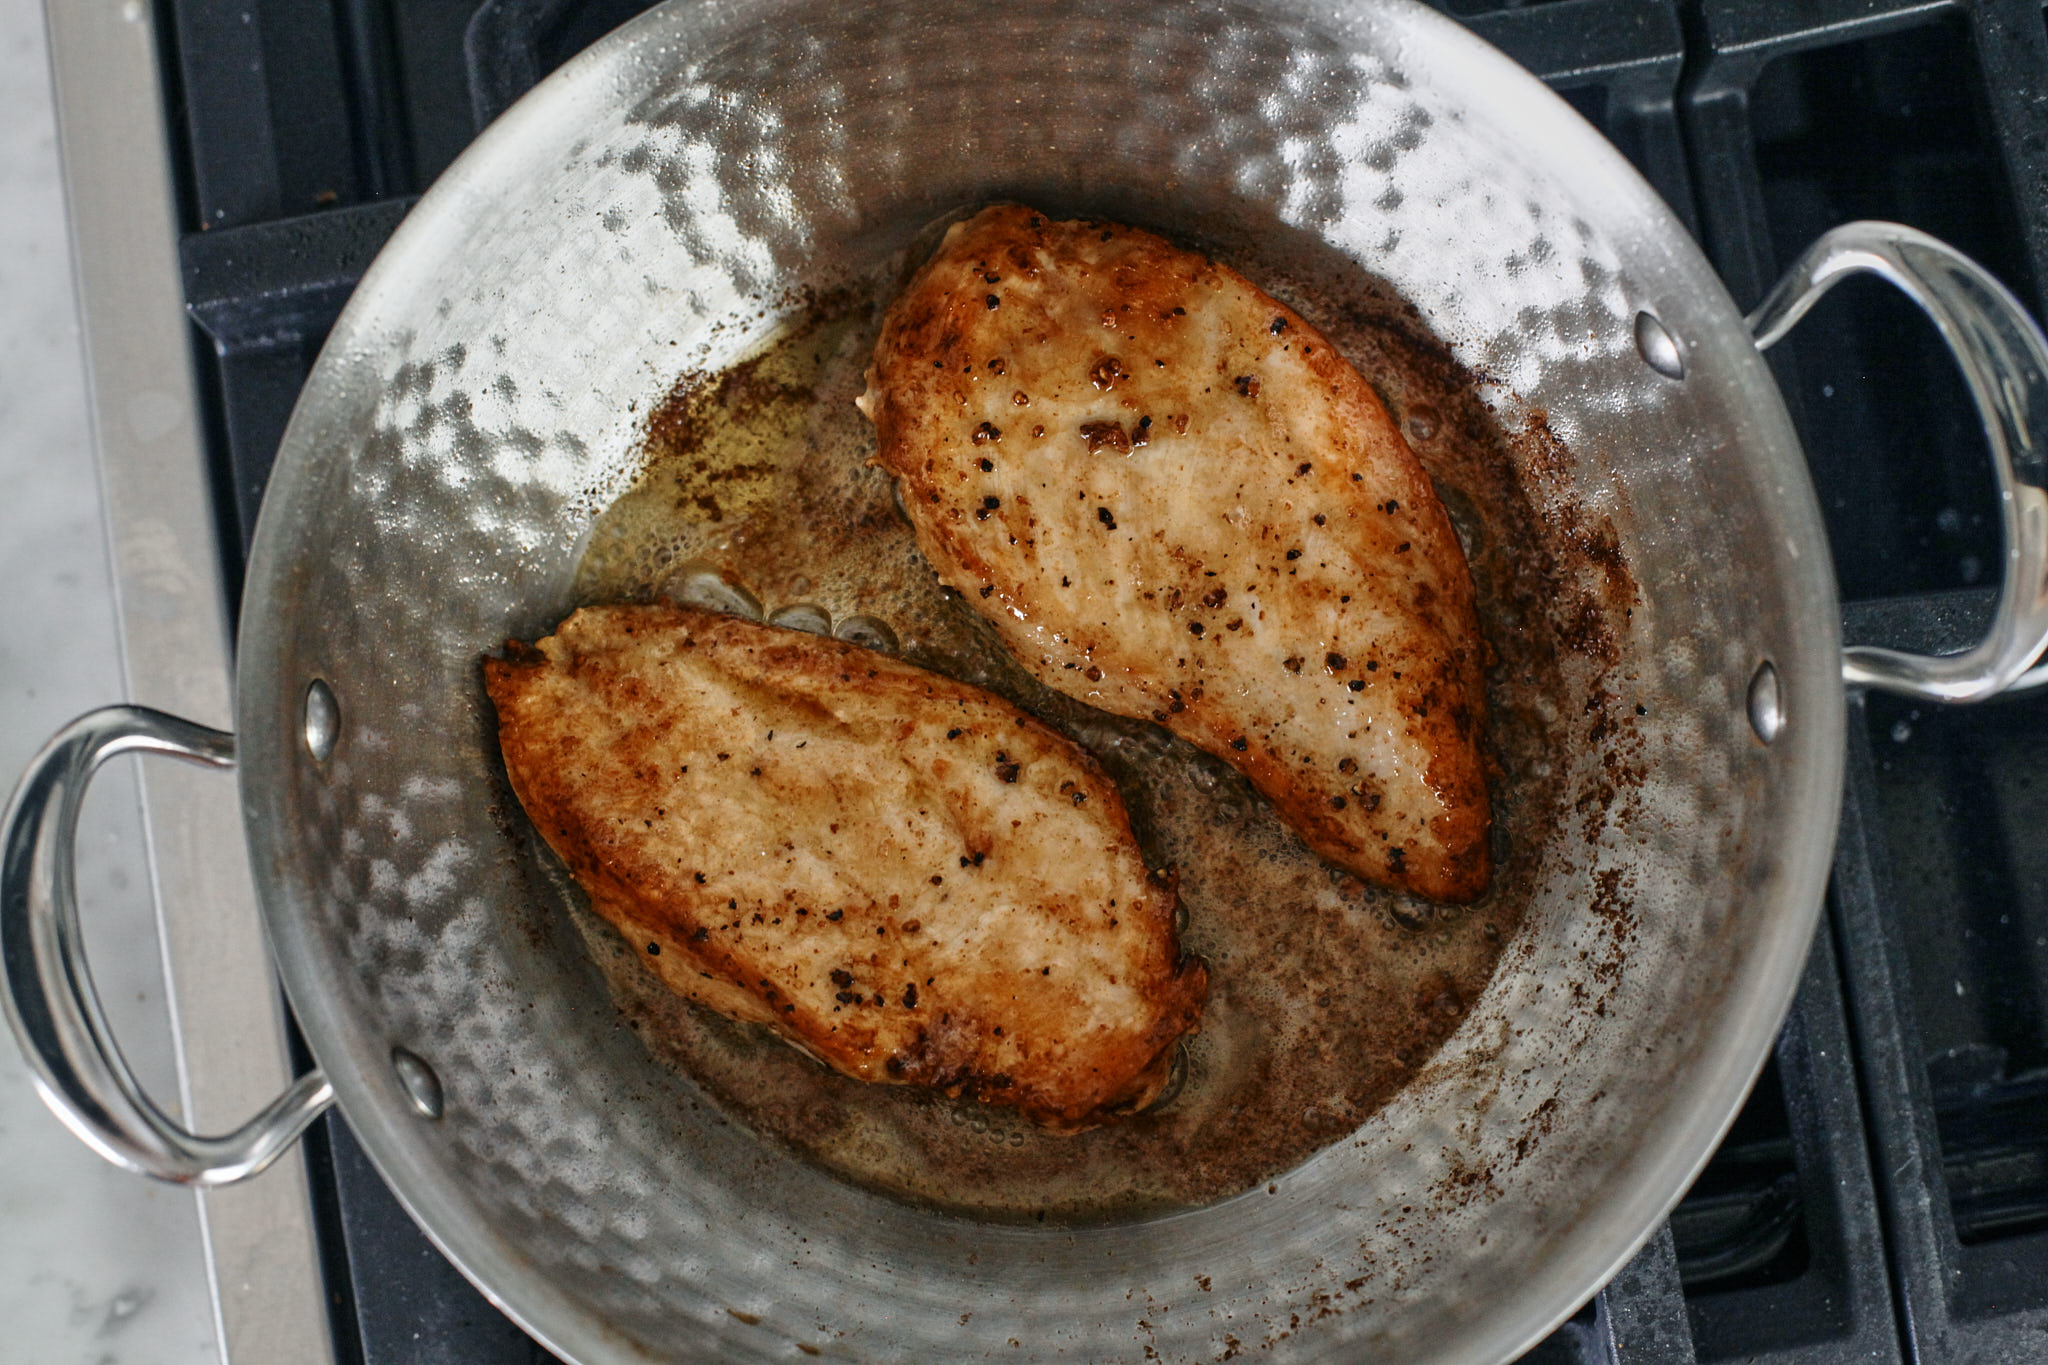 searing the chicken breasts in a skillet